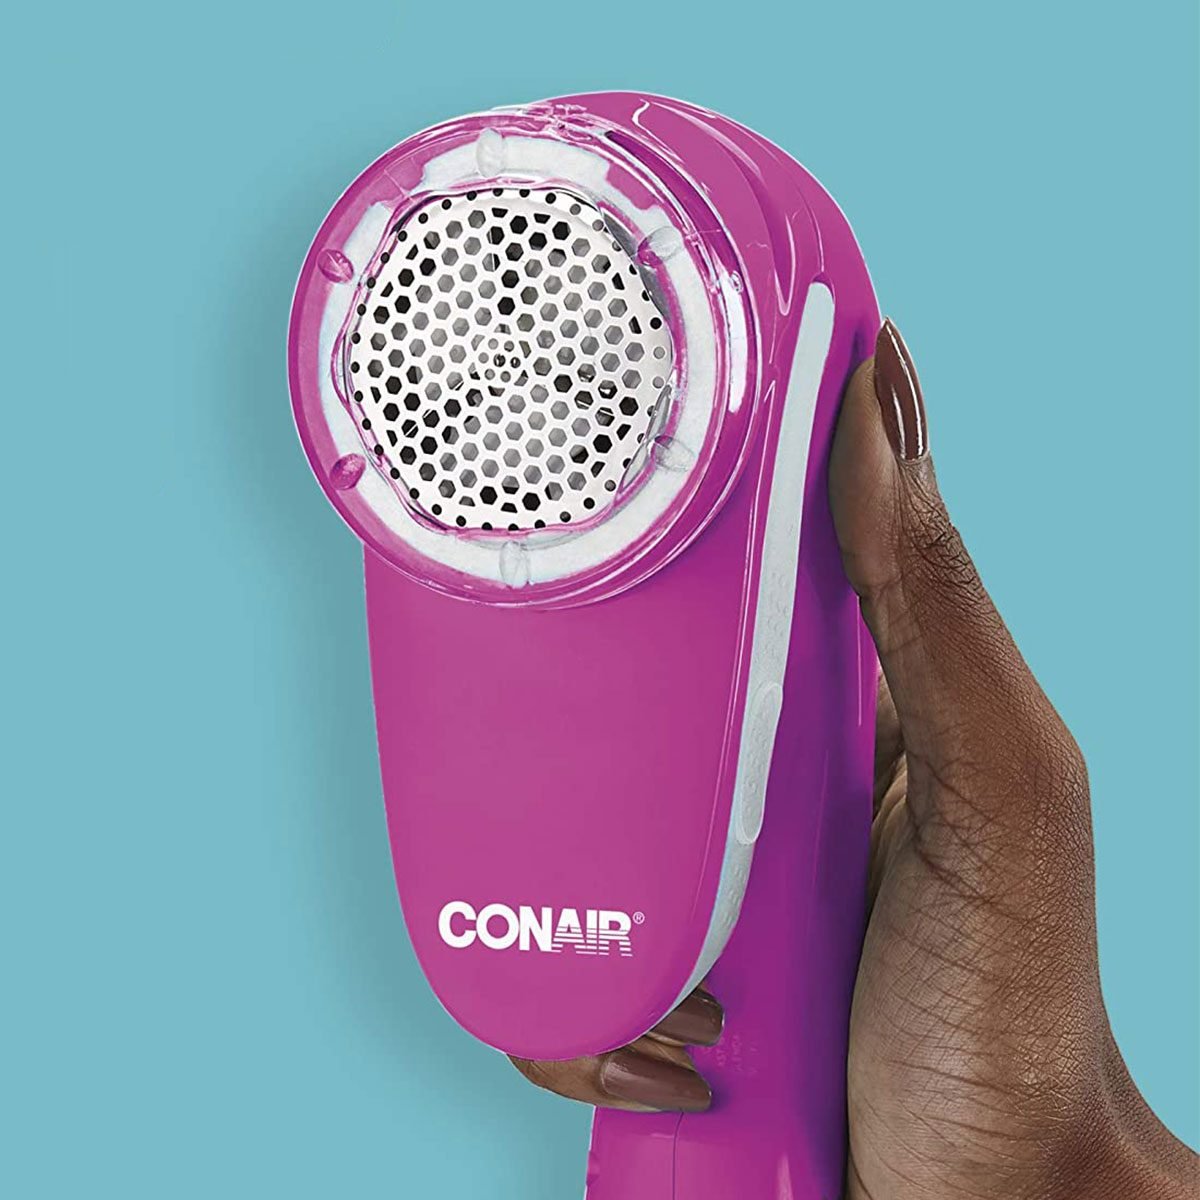 The $15 Conair Fabric Shaver for Clothes Gets Rid of Pilling and Fuzz